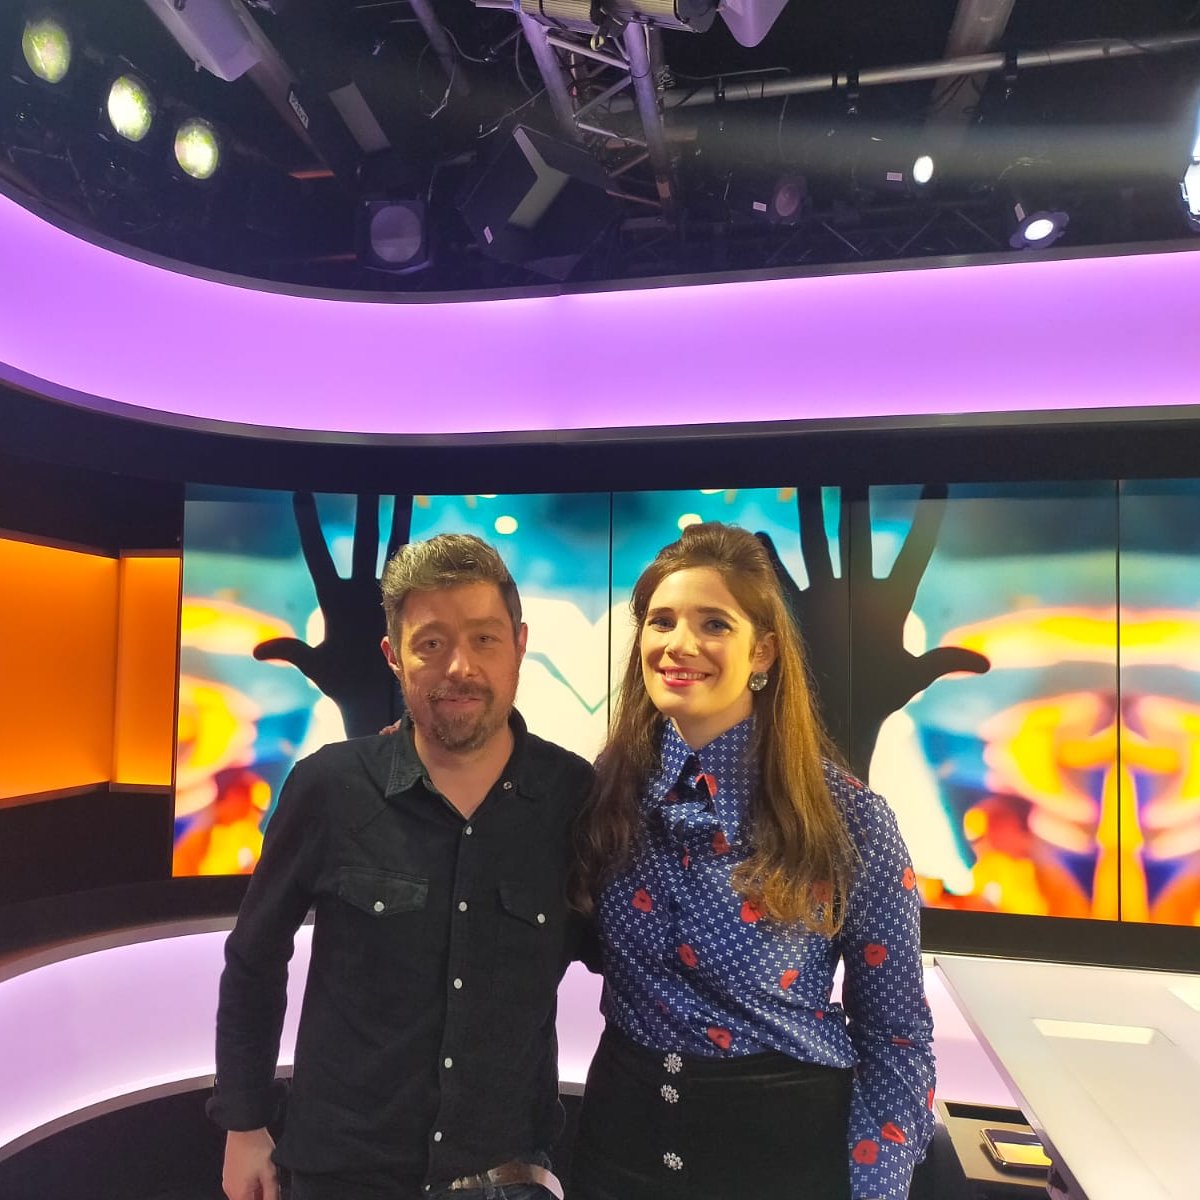 Had a lovely chat about delving into the world of #LeonardCohen with @hburnsmusic who is currently touring his excellent record #BurnsOnTheWire. Plus new music by @DianaRoss @curtisharding & @snailmail . Watch full @france24_en @EncoreF24 show here:
youtube.com/watch?v=rgqRQn…